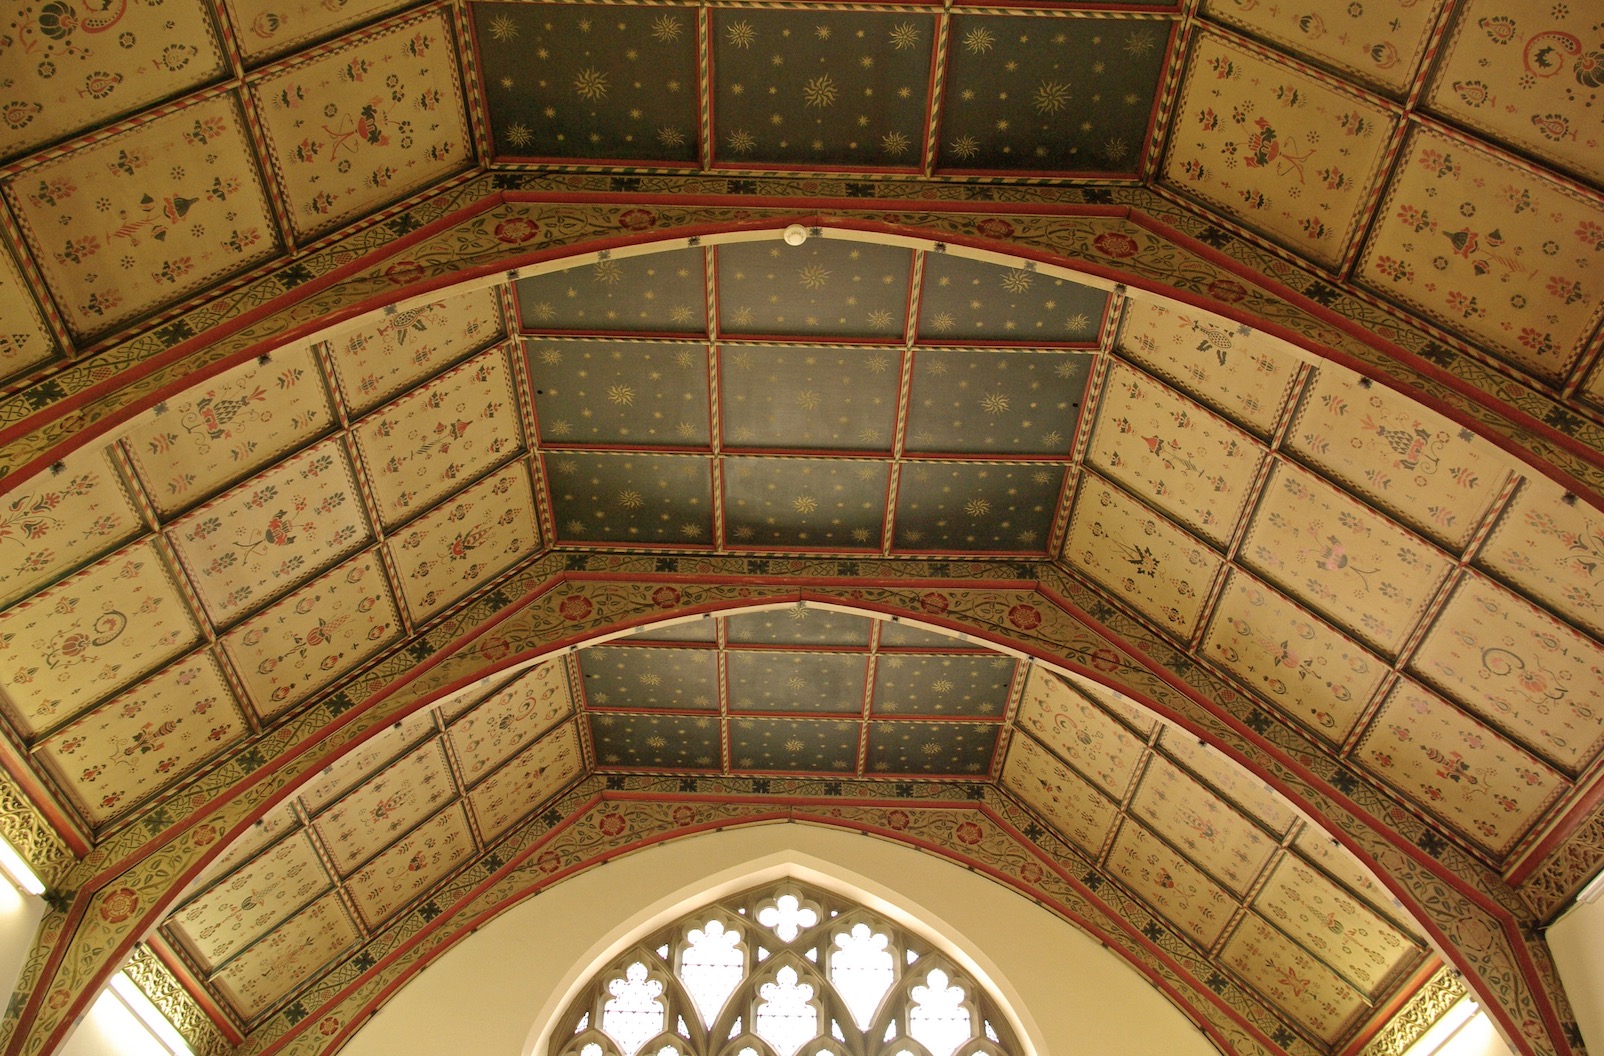 Newcastle Cathedral Ceiling - Always Look Up